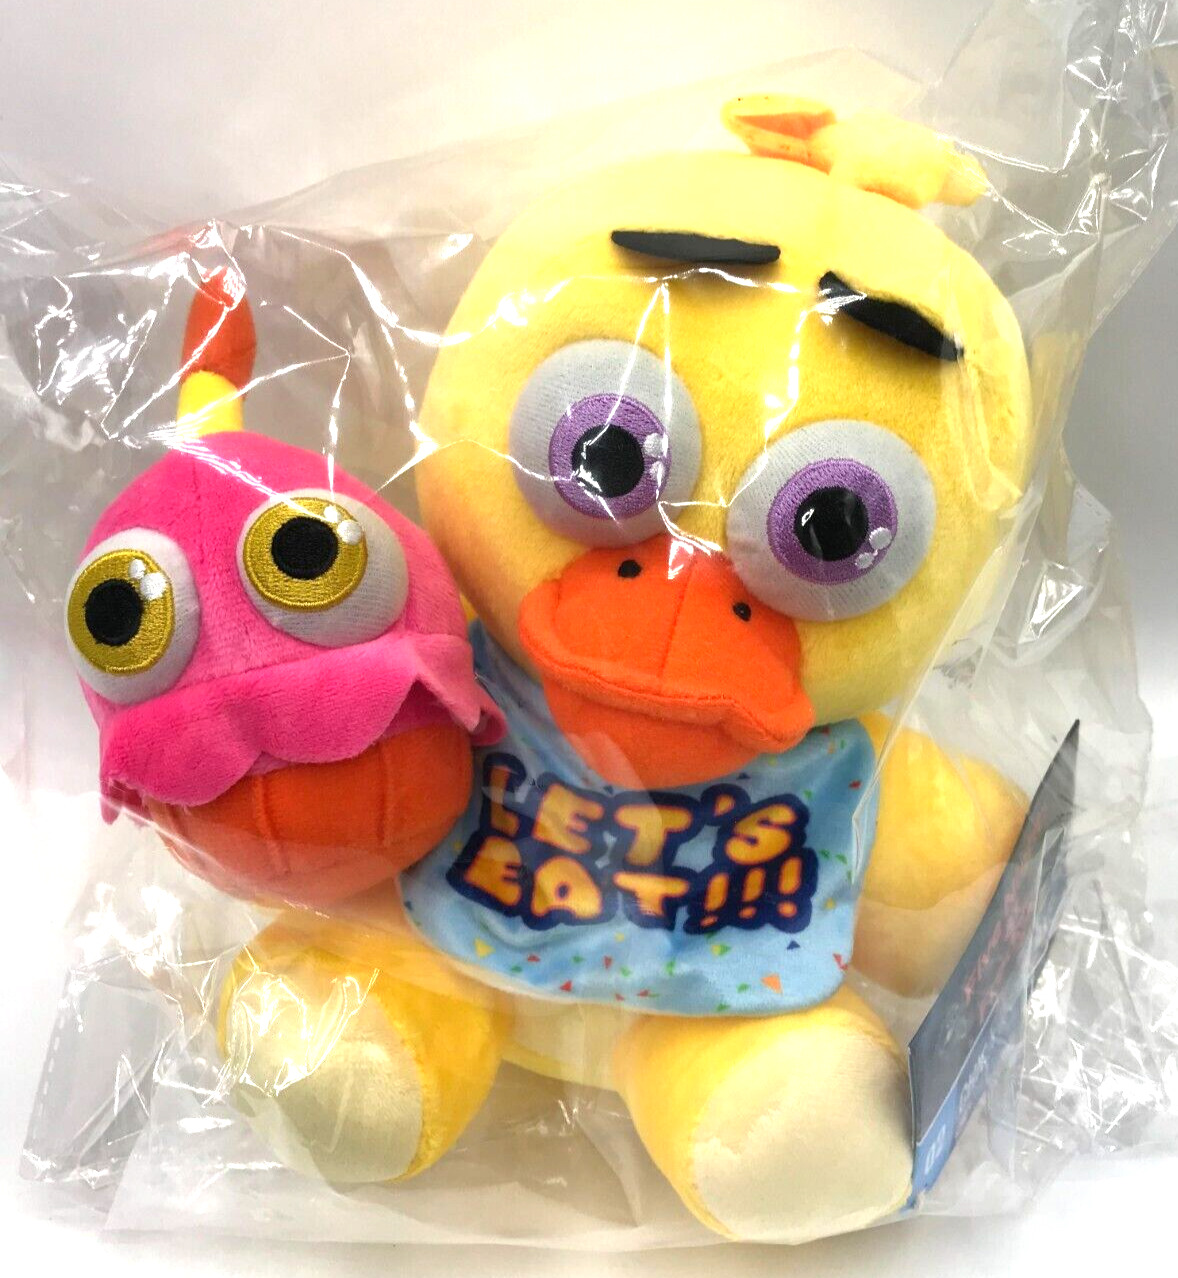 OFFICIAL SANSHEE FNAF CHICA & CUPCAKE PLUSH FIVE NIGHTS AT FREDDY'S NEW SEALED